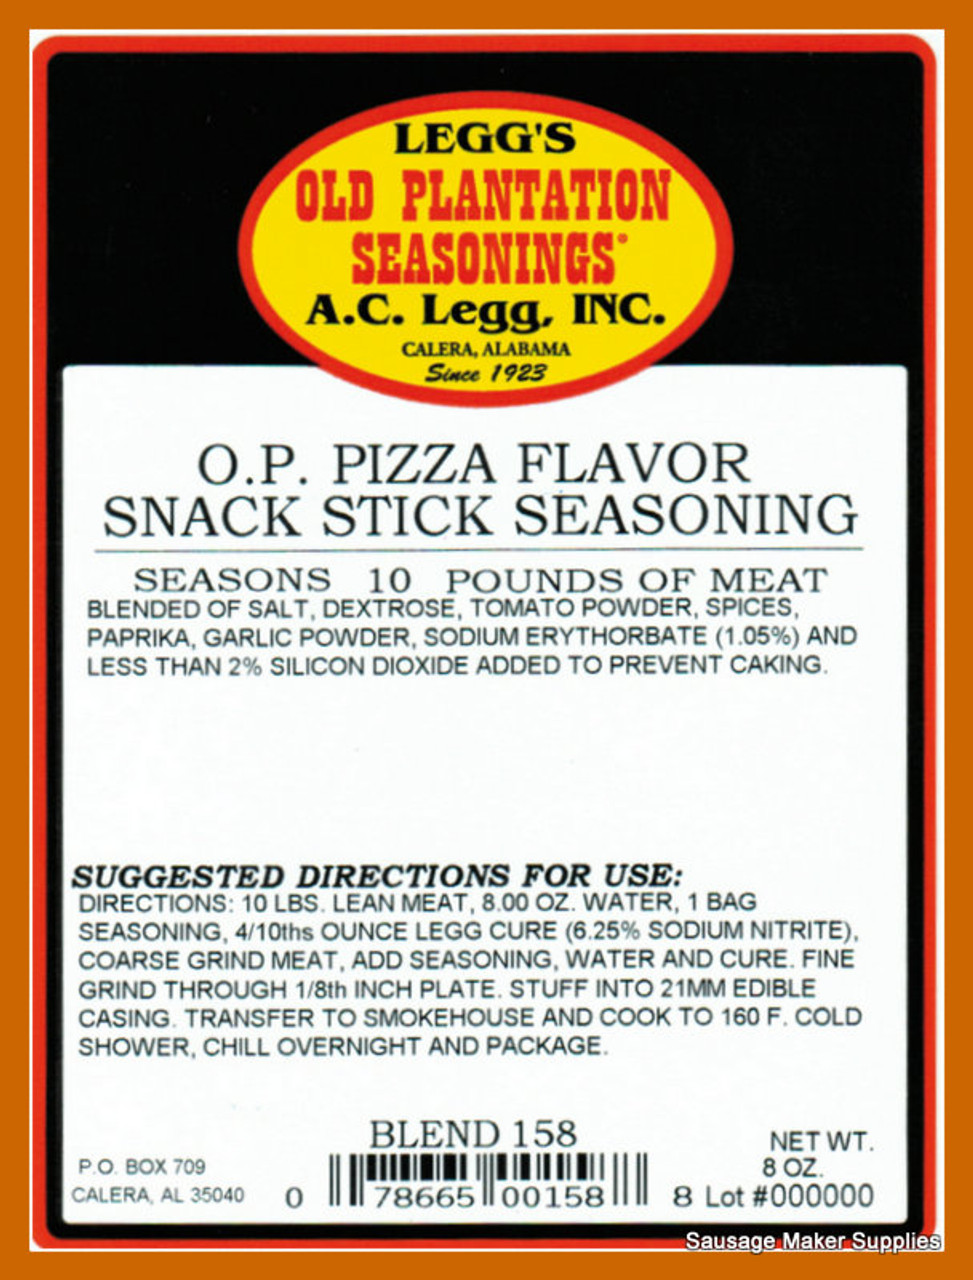 A.C.LEGG'S PIZZA FLAVORED SNACK STICK SEASONING BLEND 158